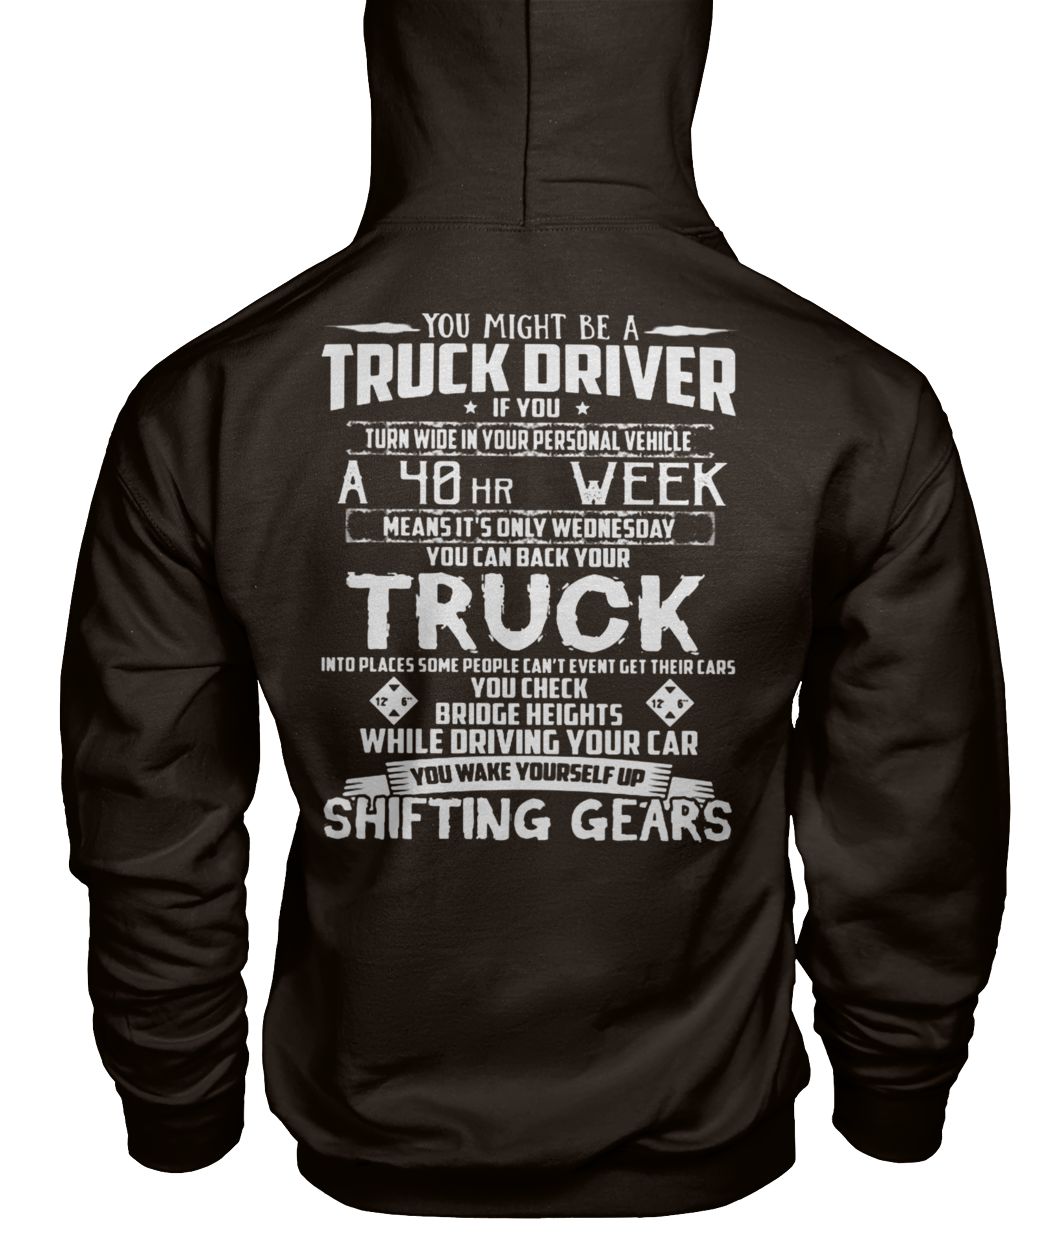 You might be a truck driver if you turn wide in your personal vehicle a 40hr week gildan hoodie